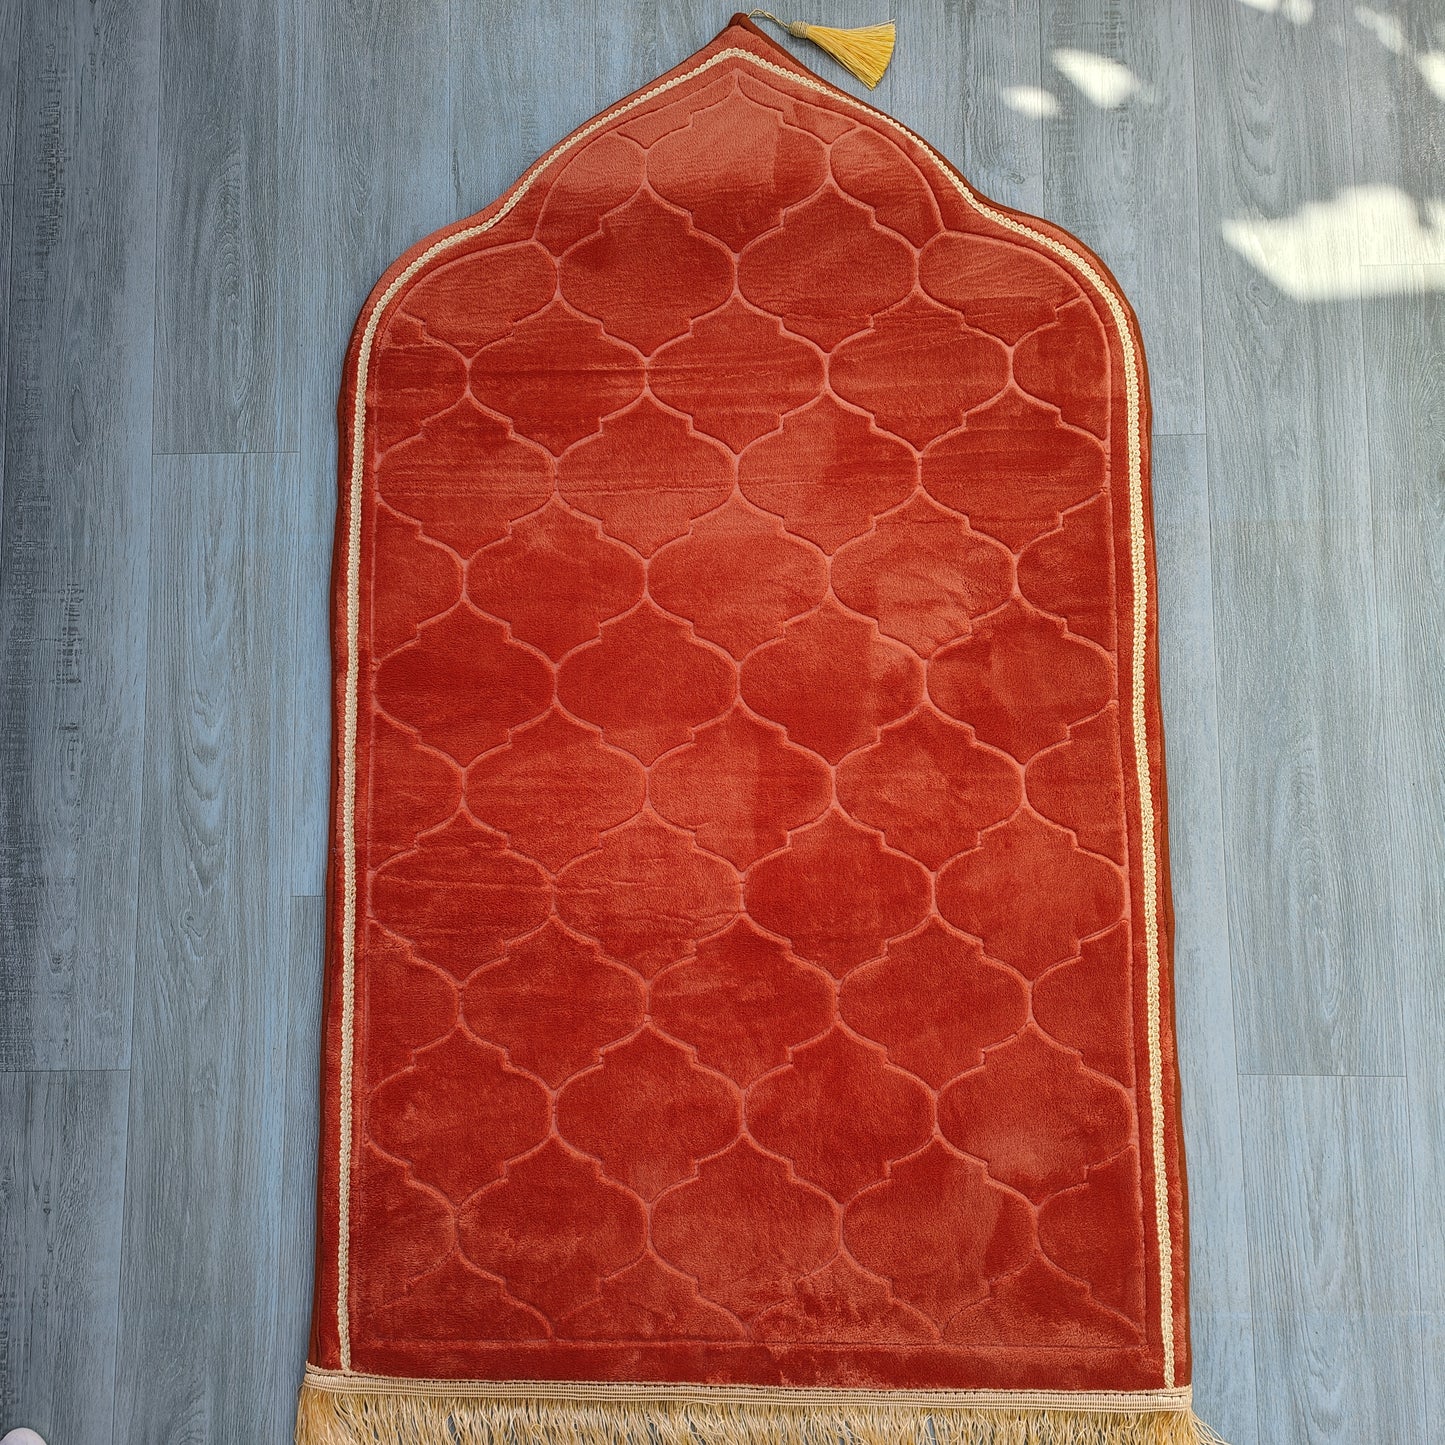 Padded Prayer Mat in Canyon Clay